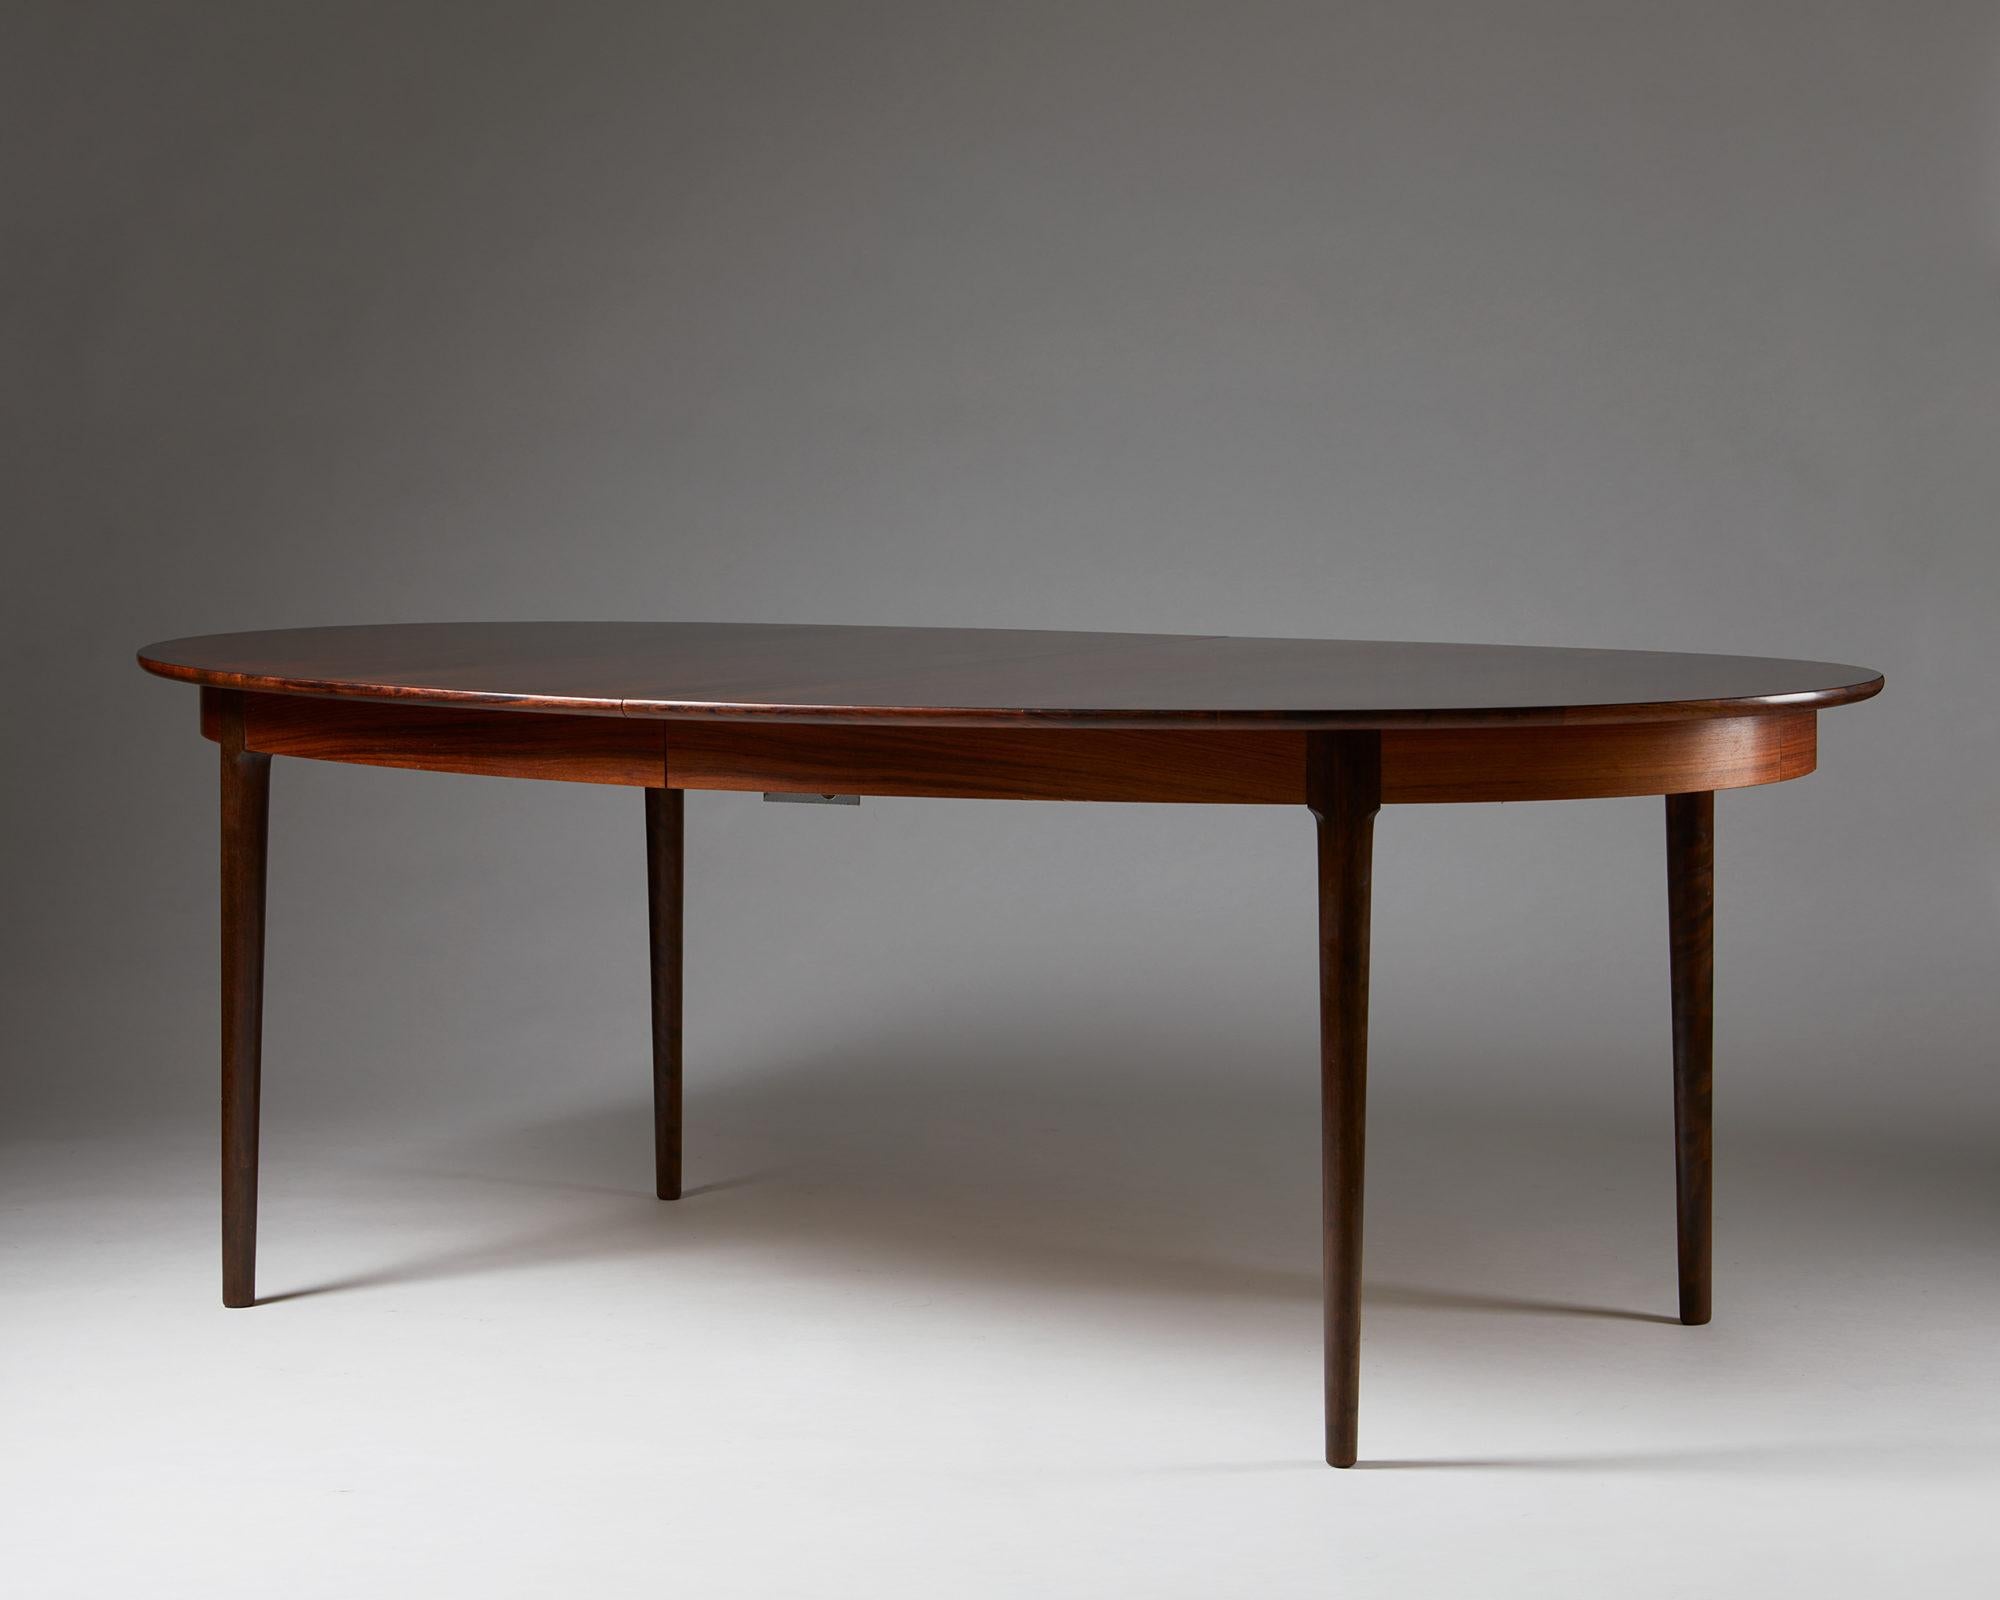 Dining table ‘Darby’ designed by Torbjörn Afdal for Bruksbo,
Norway, 1960s.

Brazilian rosewood.

Rosewood figuring and attention to detail characterise this refined dining table’s design. The pattern created by the book matched rosewood veneer is